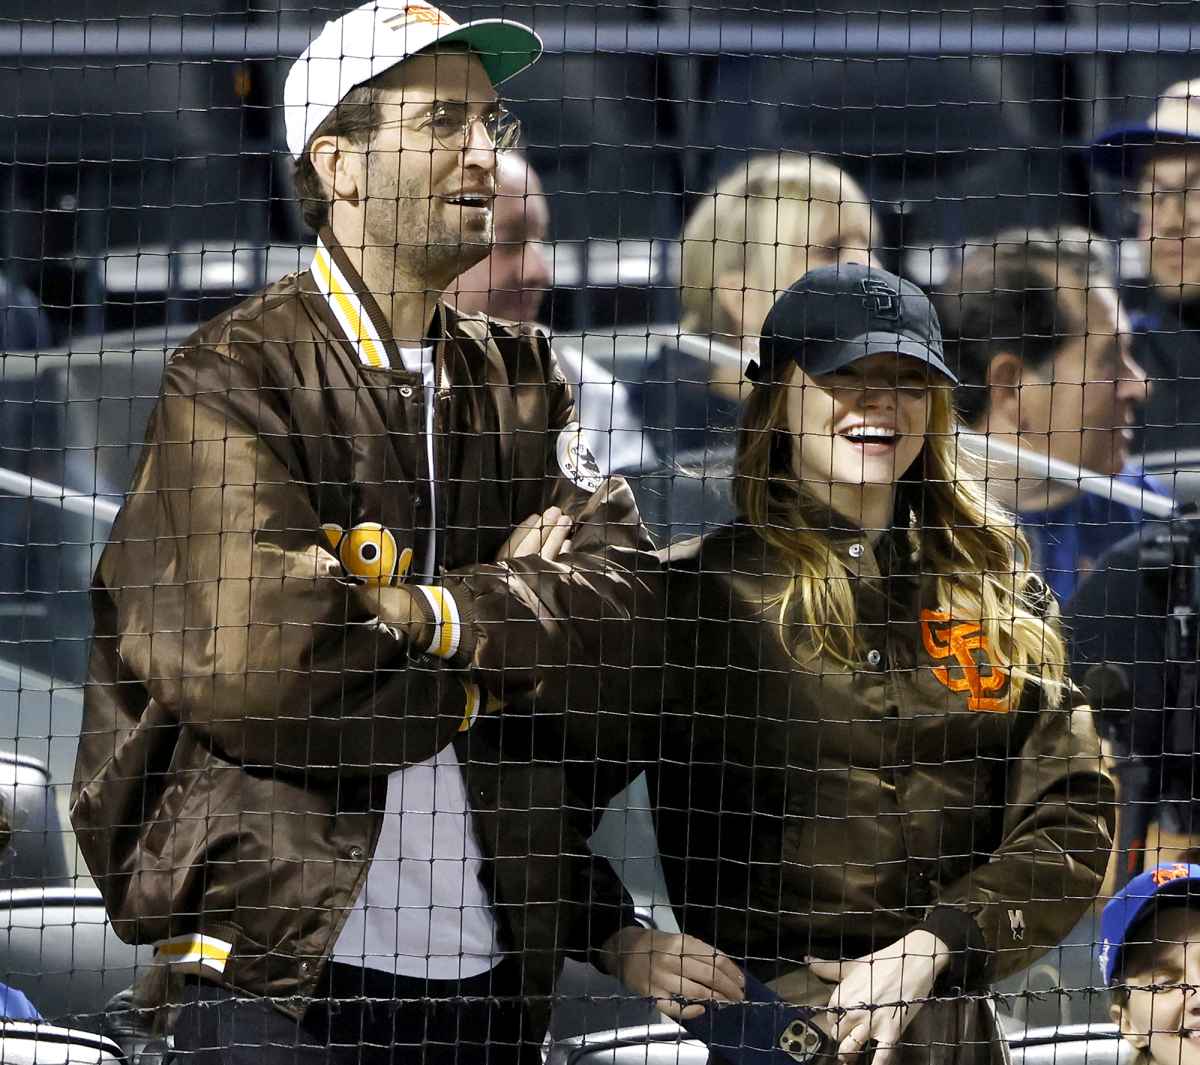 Emma Stone and Dave McCary Relationship Timeline - Who Is Emma